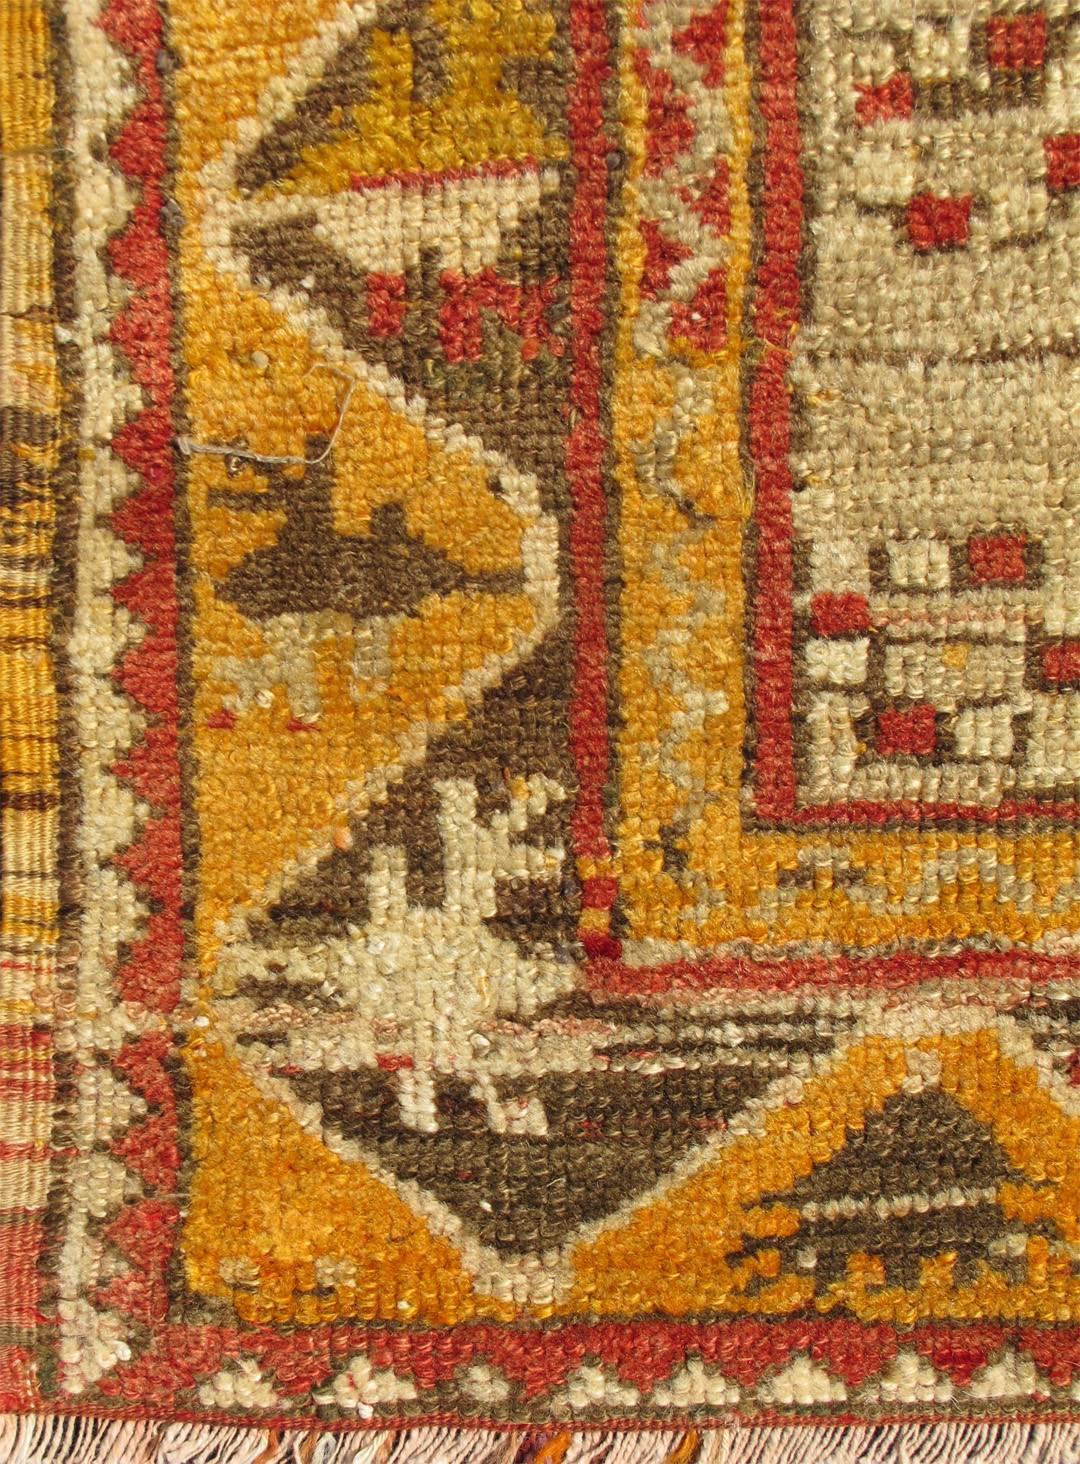 Antique Turkish Oushak prayer rug in red, ivory, brown, orange and yellow, 1910, rug ca-12793, country of origin / type: Turkey / Oushak, circa 1910

This antique Turkish rug, circa 1910 features an intricately beautiful design. The prayer centre